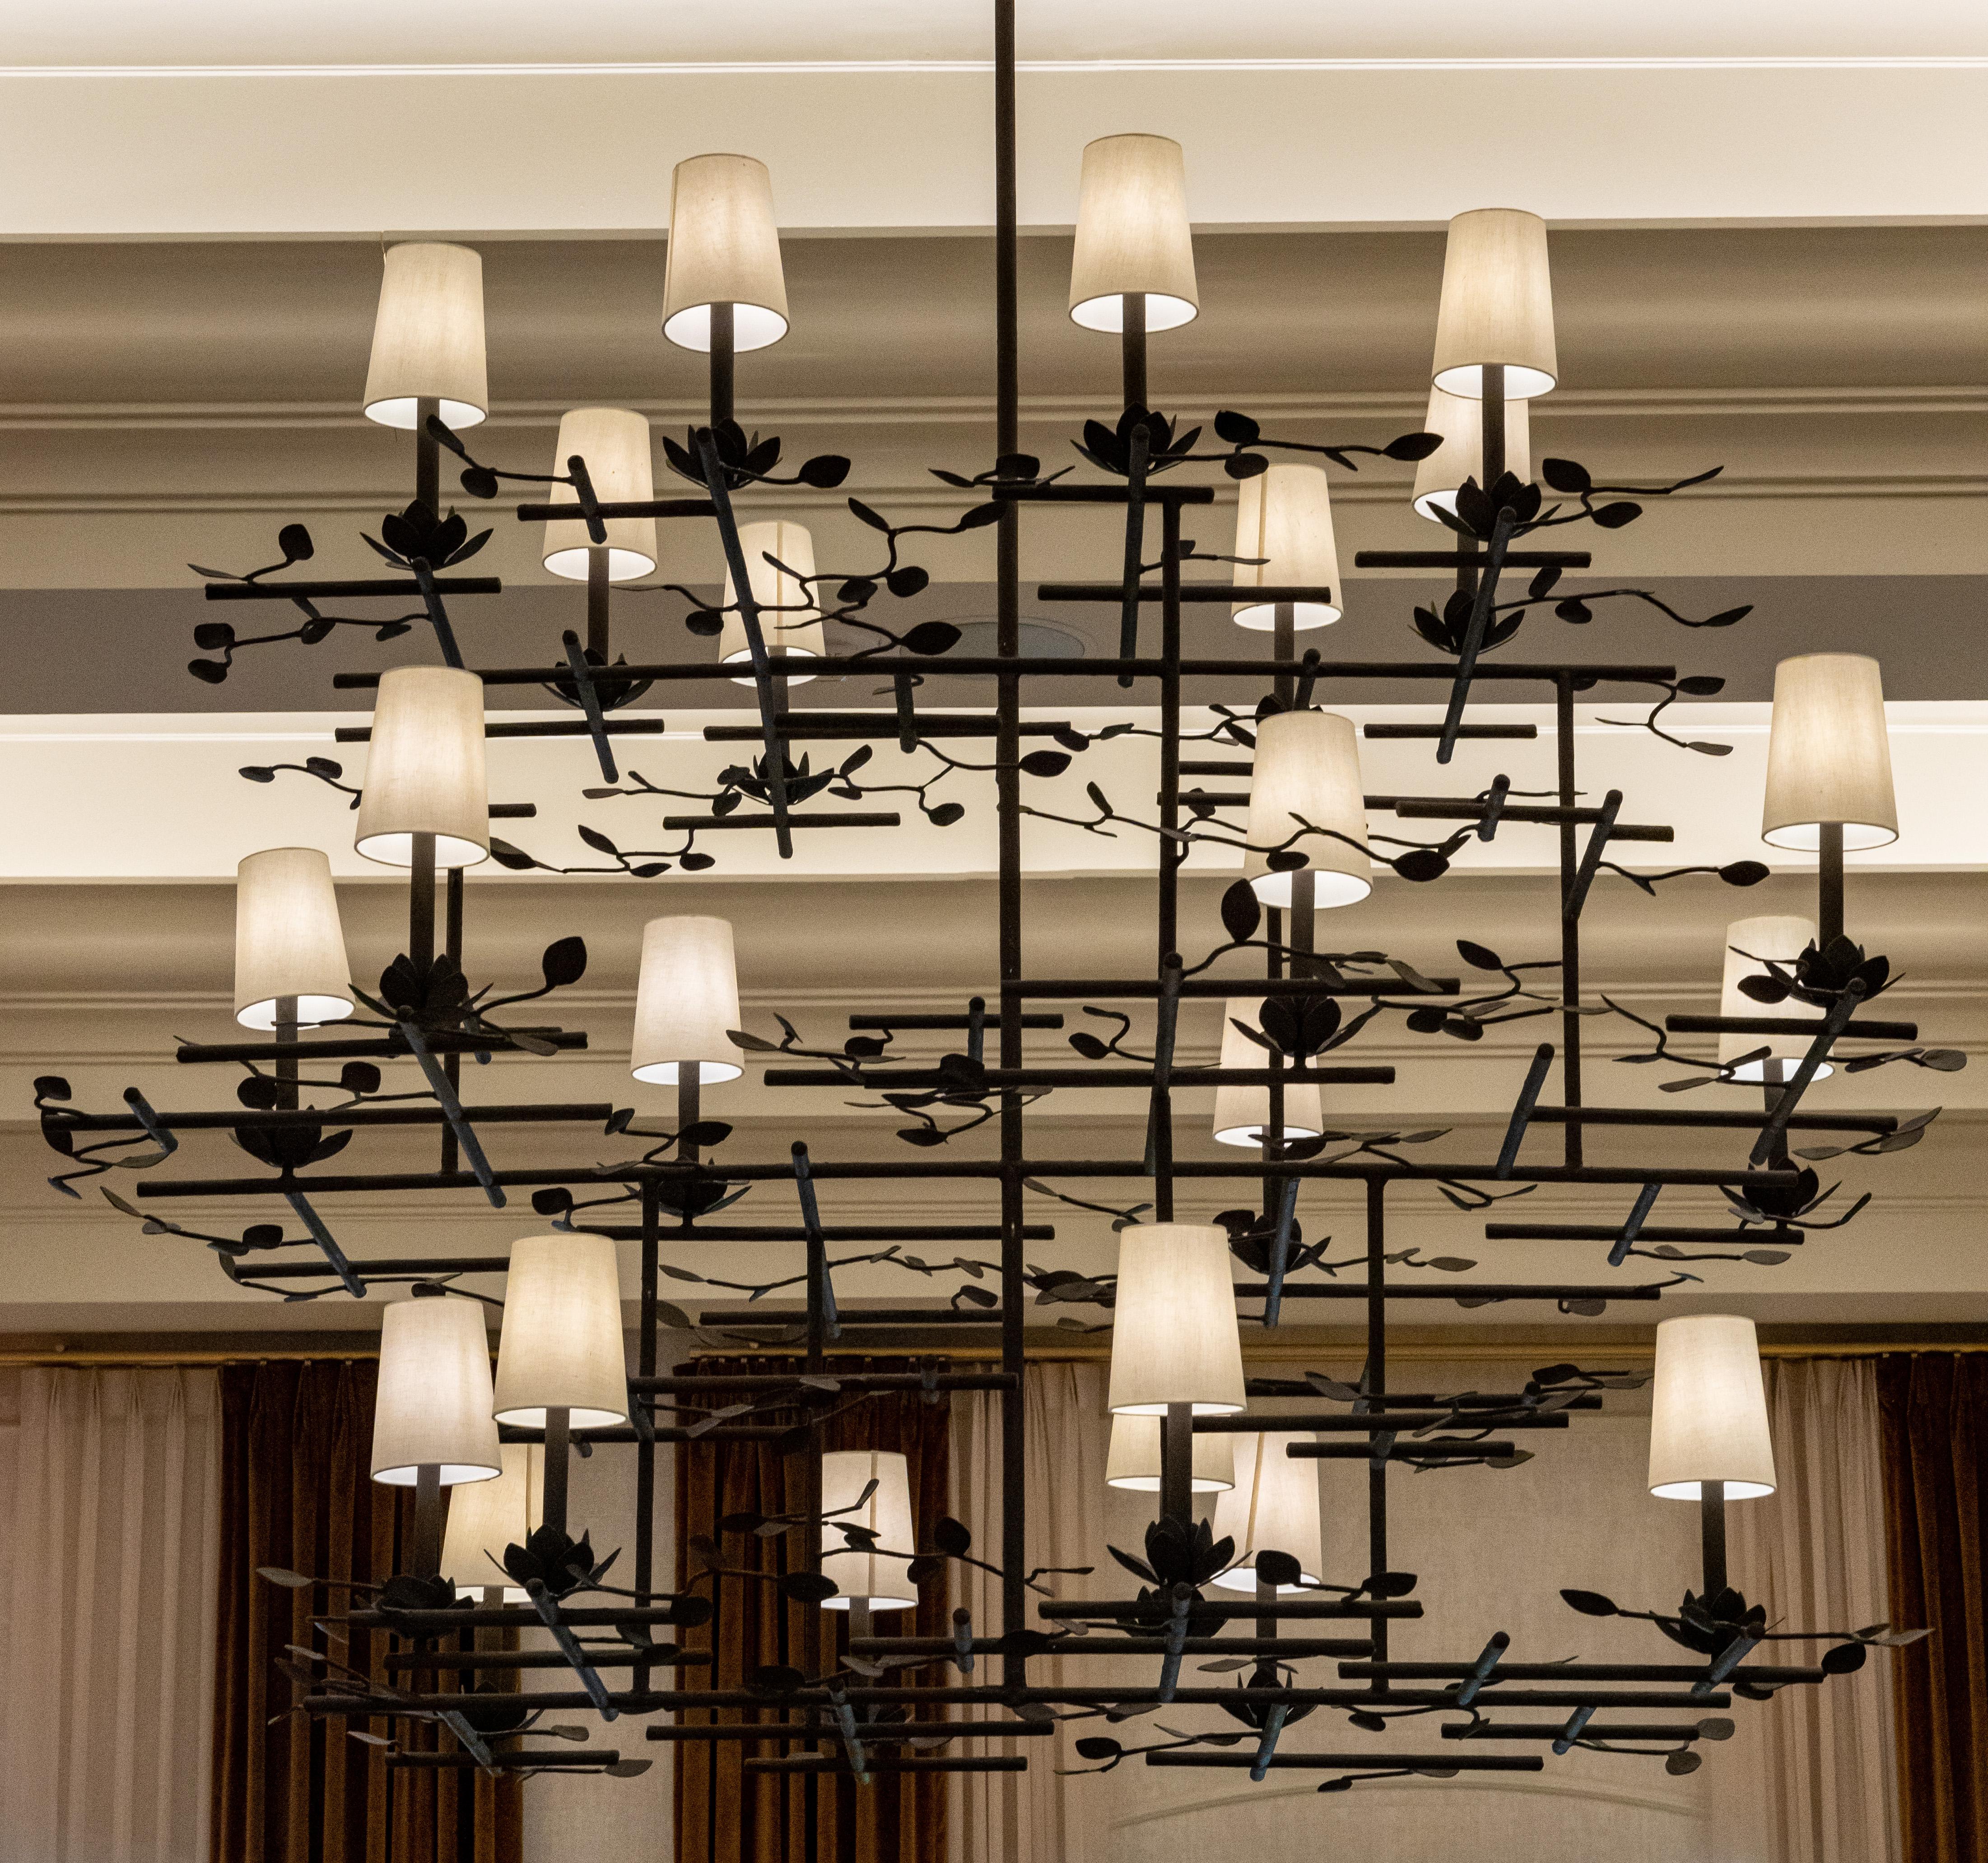 Stunning bronzed finished lotus chandelier with light shades by Tracey Garet of Apsara Interior Design. The chandelier has multiple tiers and 24 lights. Each light rises out of a lotus flower and is surrounded by leaves and branches.  The